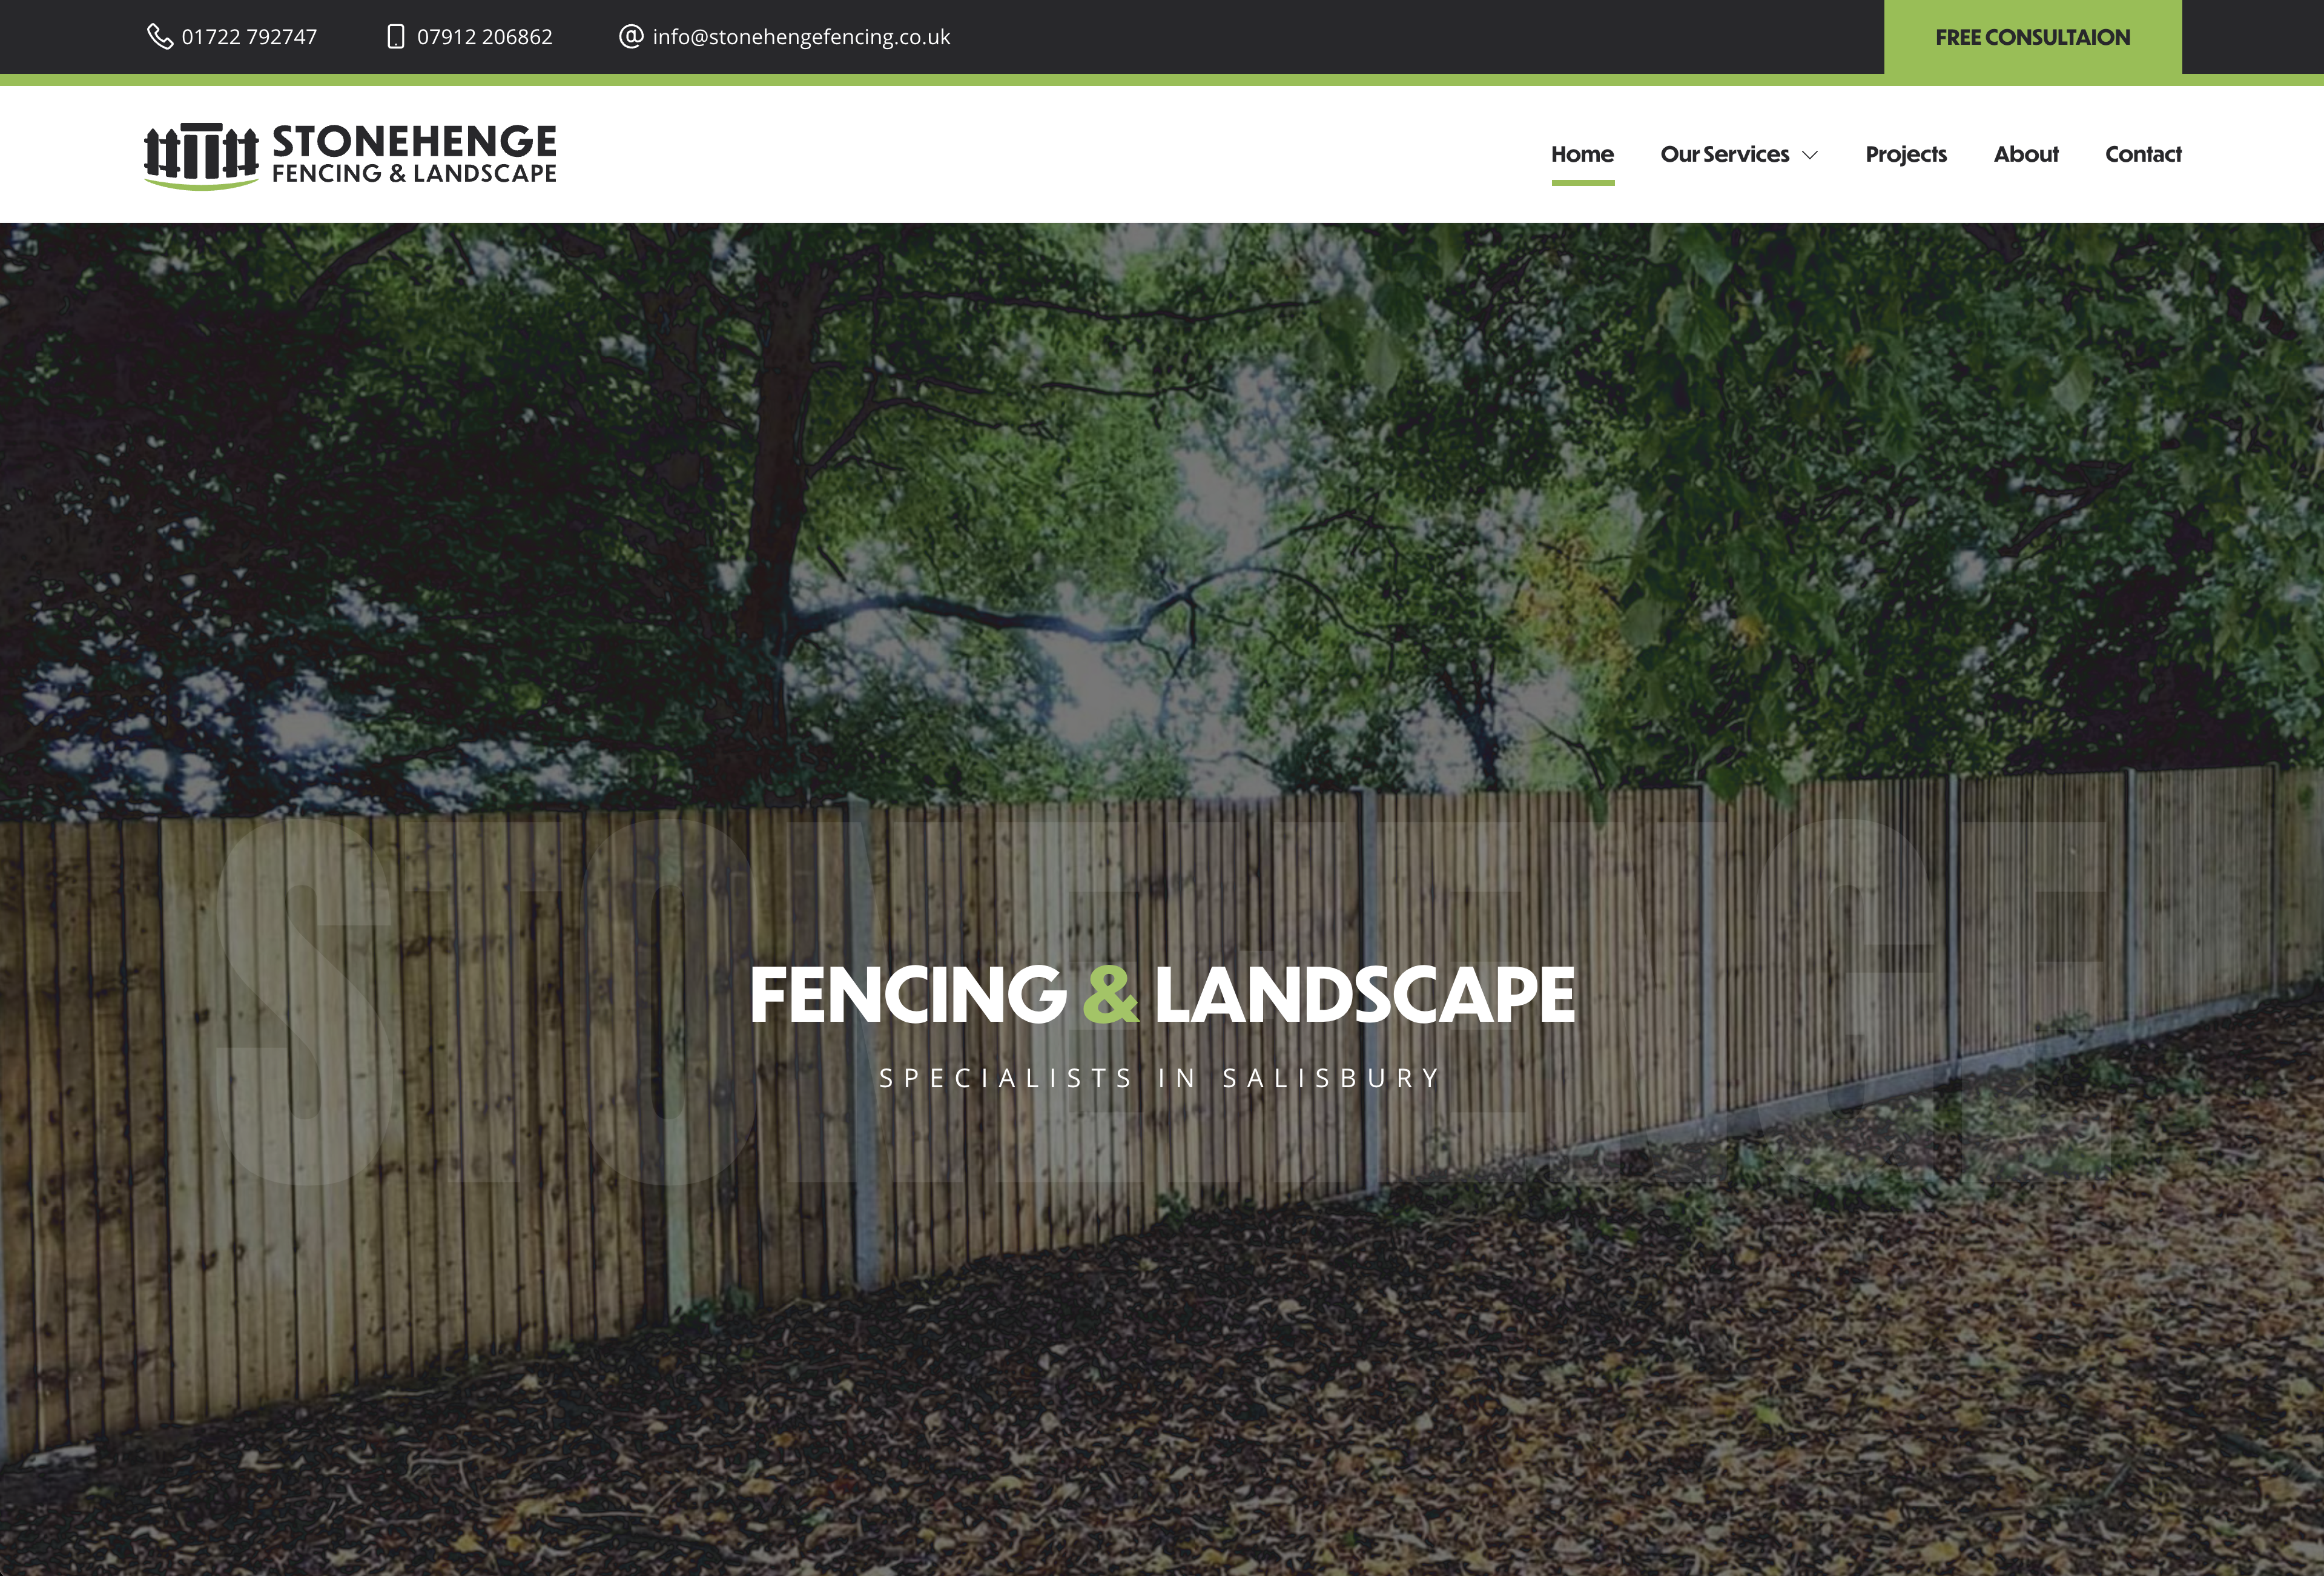 Stonehenge fencing and landscape website home page introduction.